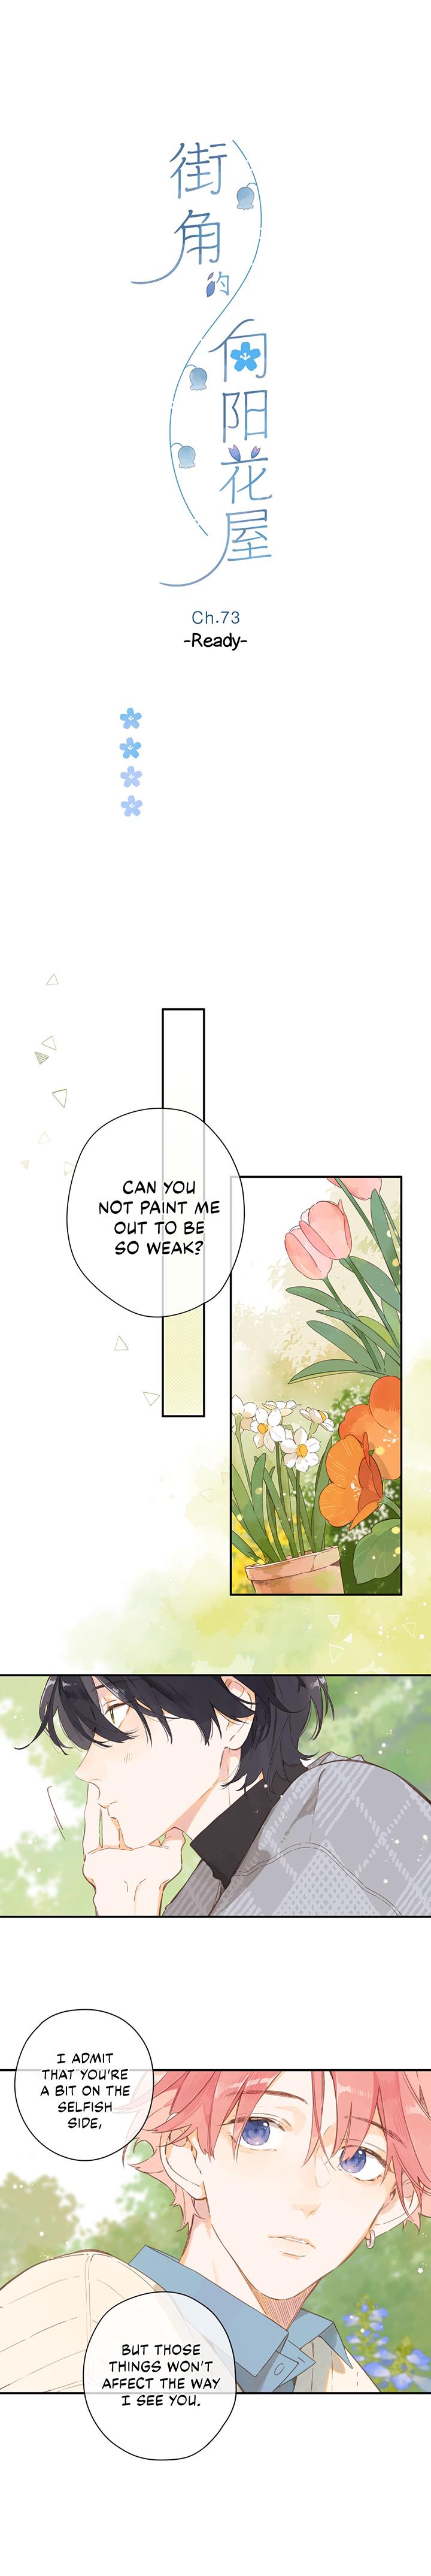 Summer Bloom At The Corner Of The Street Chapter 73: Ready - Picture 1